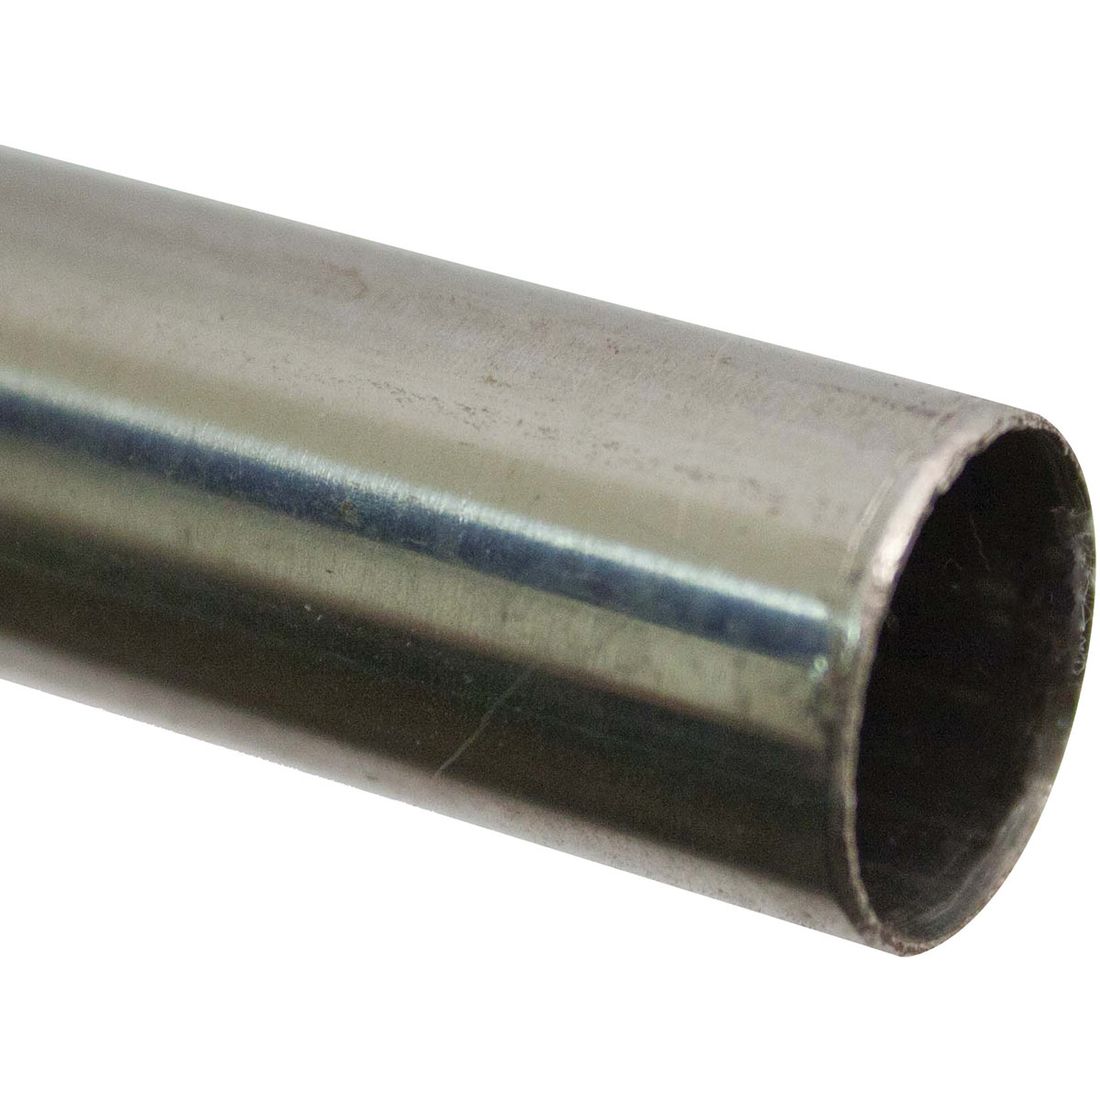 Stainless Steel Tube 15Mm X 2M